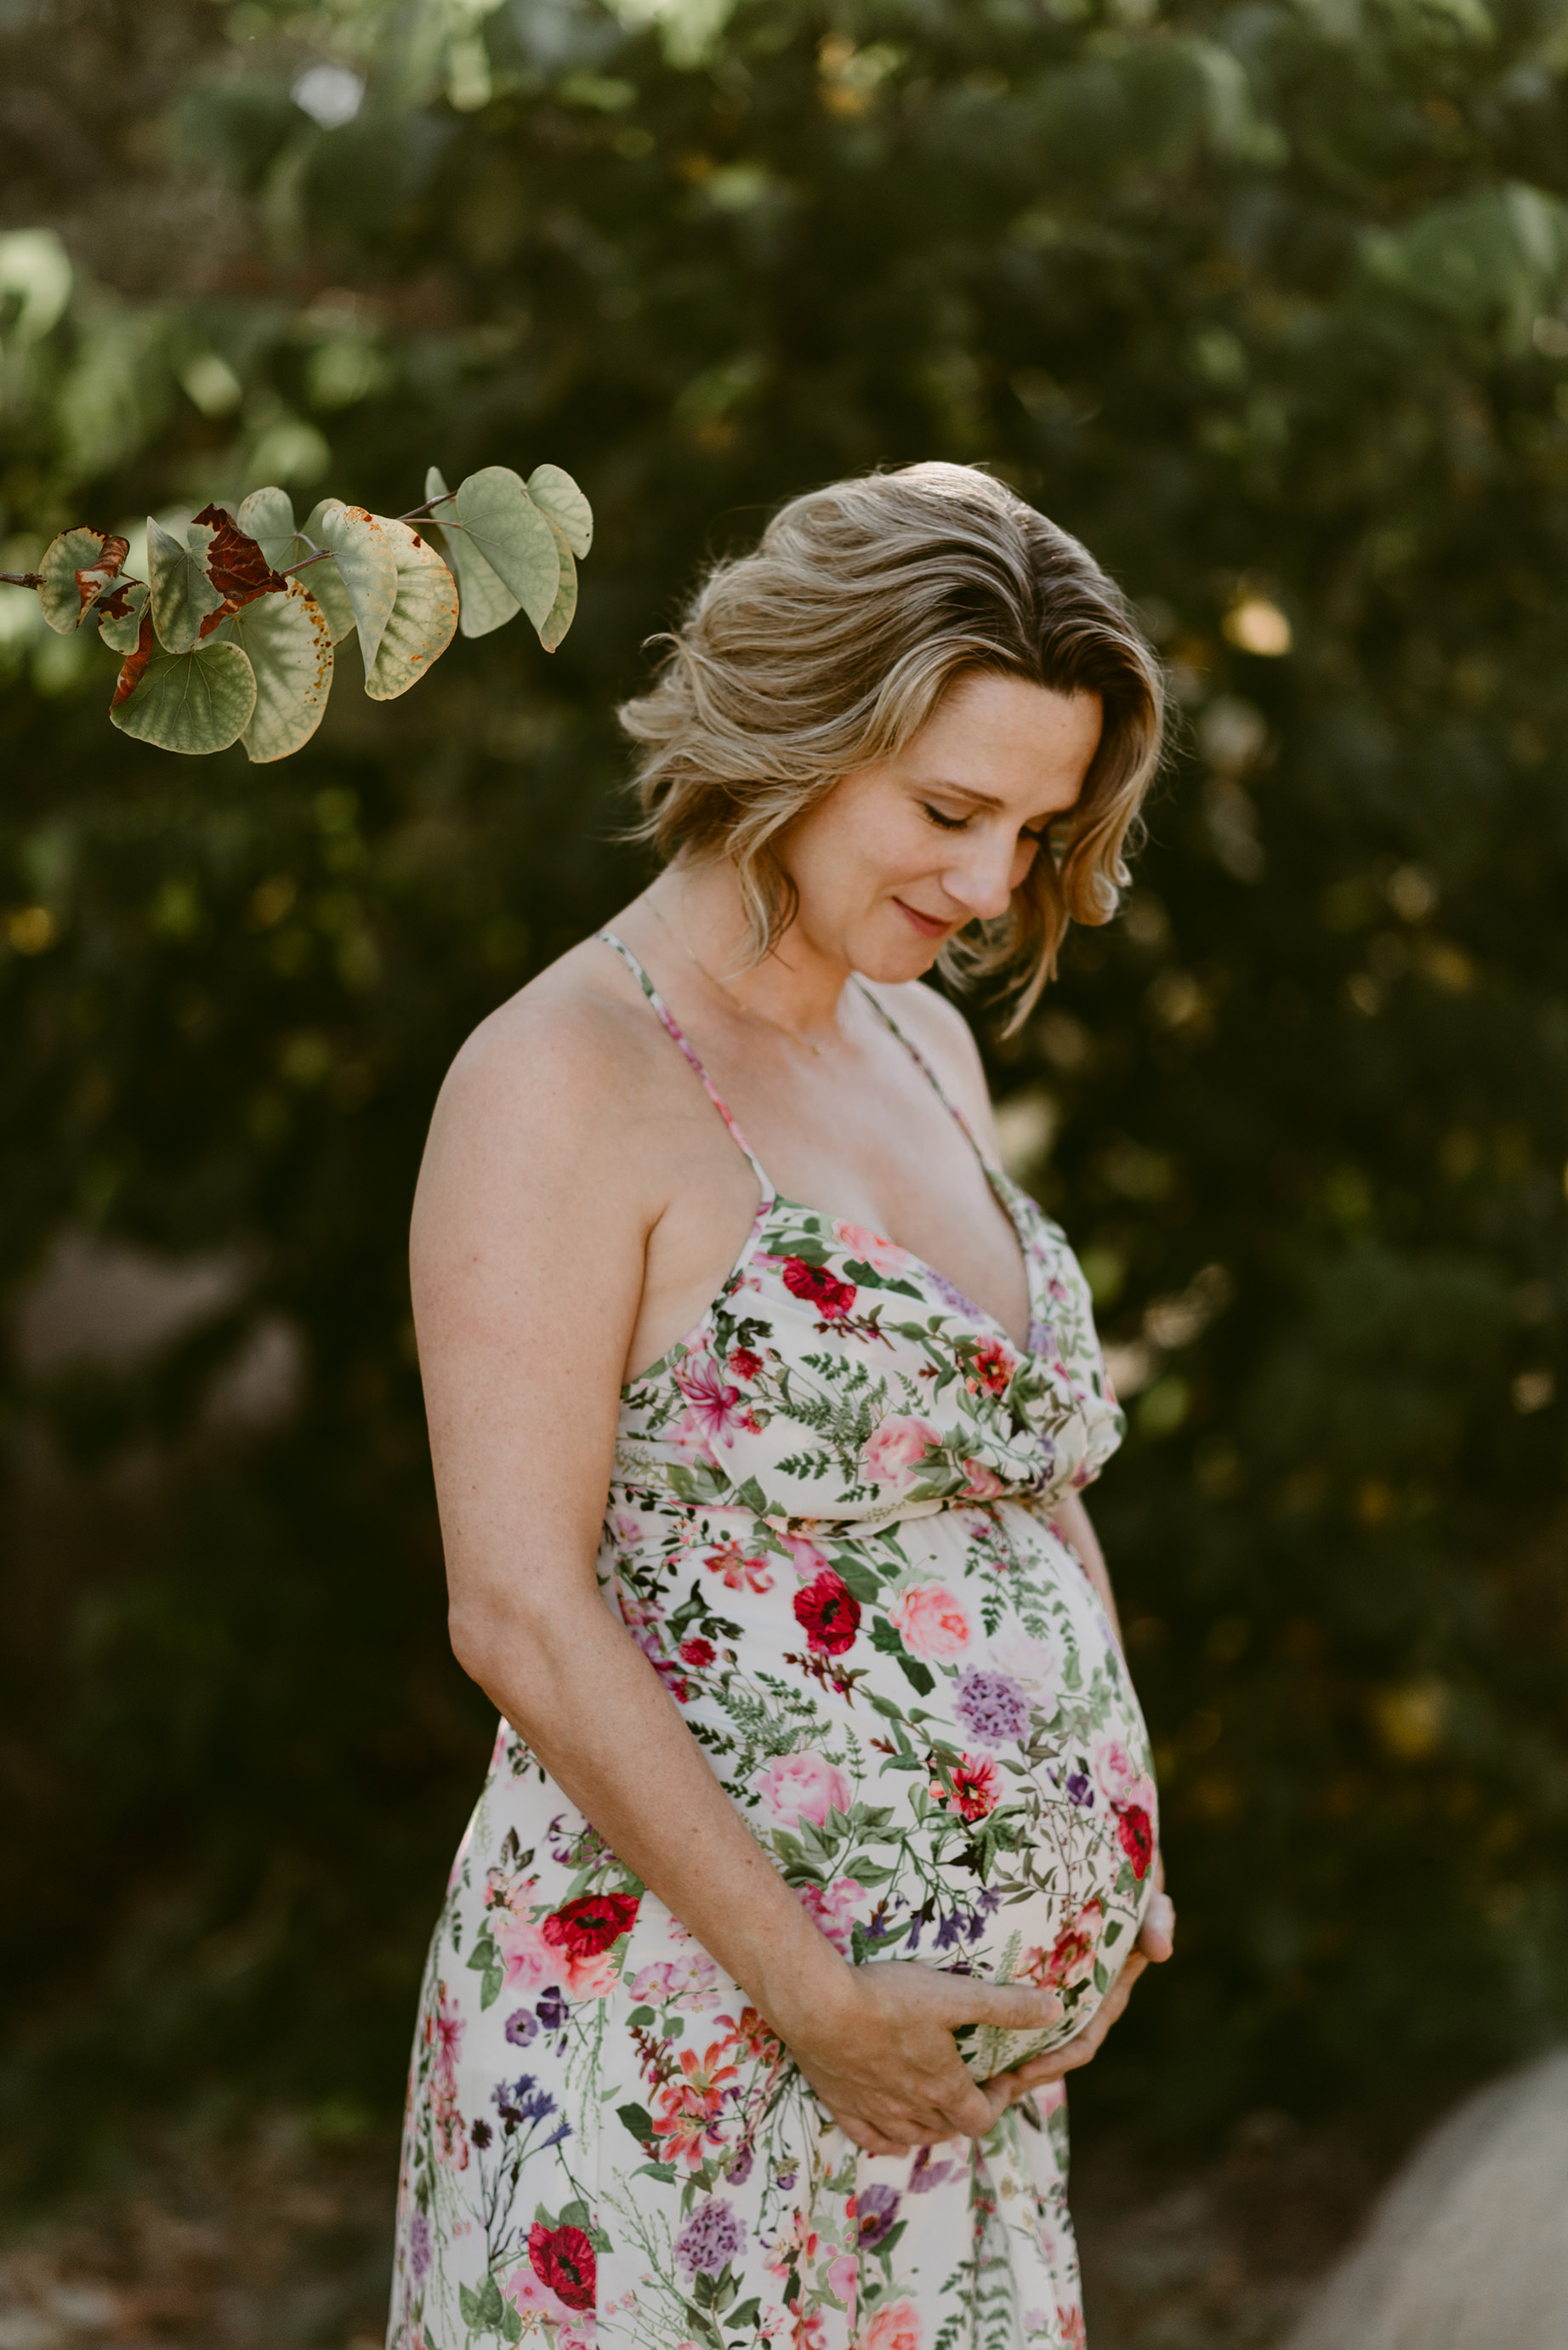 M+J // A Los Angeles Maternity Session – Julie Pepin Photography Blog